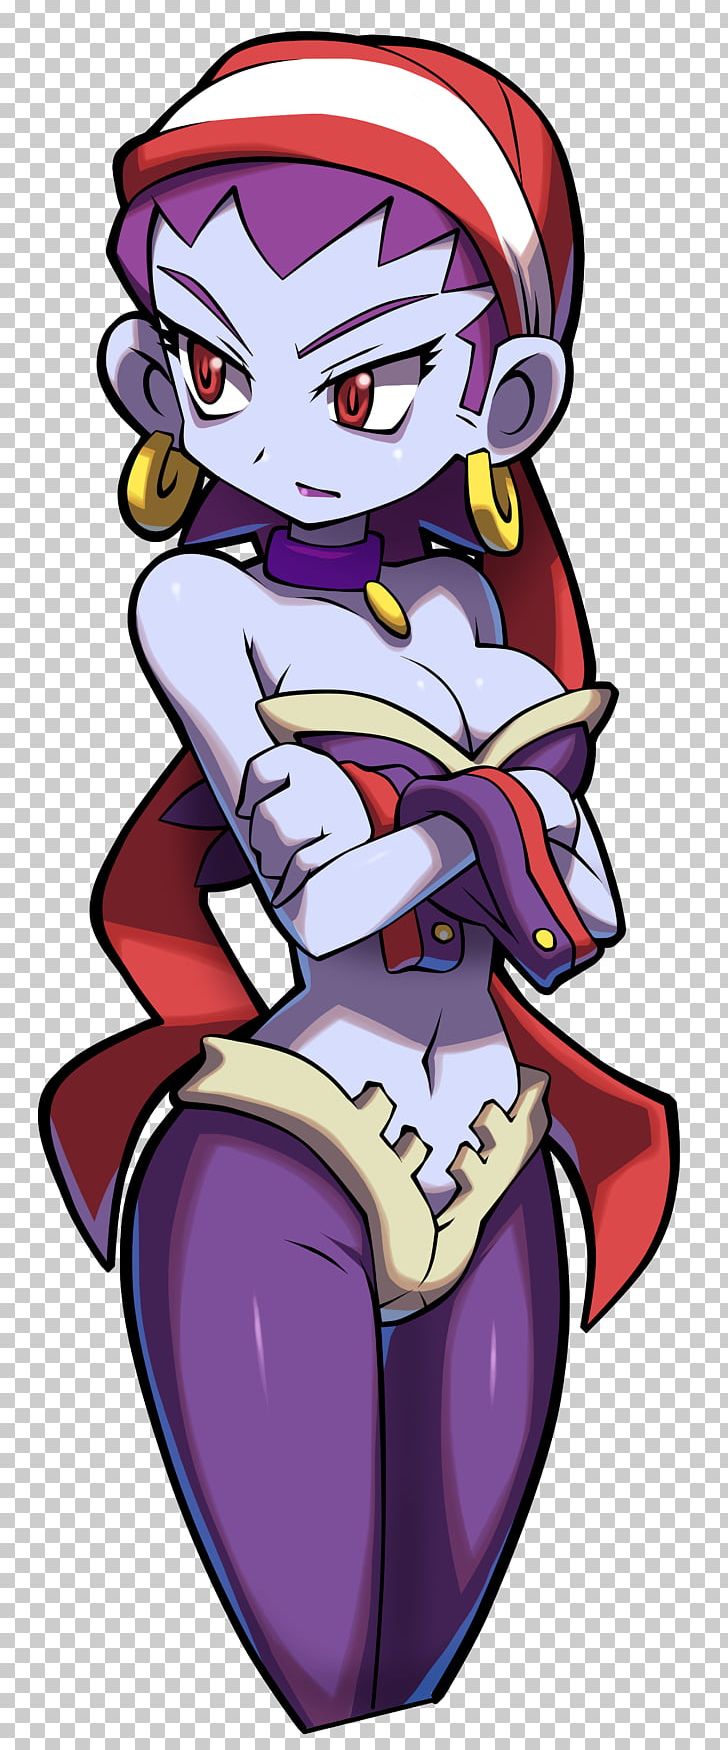 Shantae And The Pirate's Curse Wii U Nintendo 3DS Illustration North America PNG, Clipart,  Free PNG Download